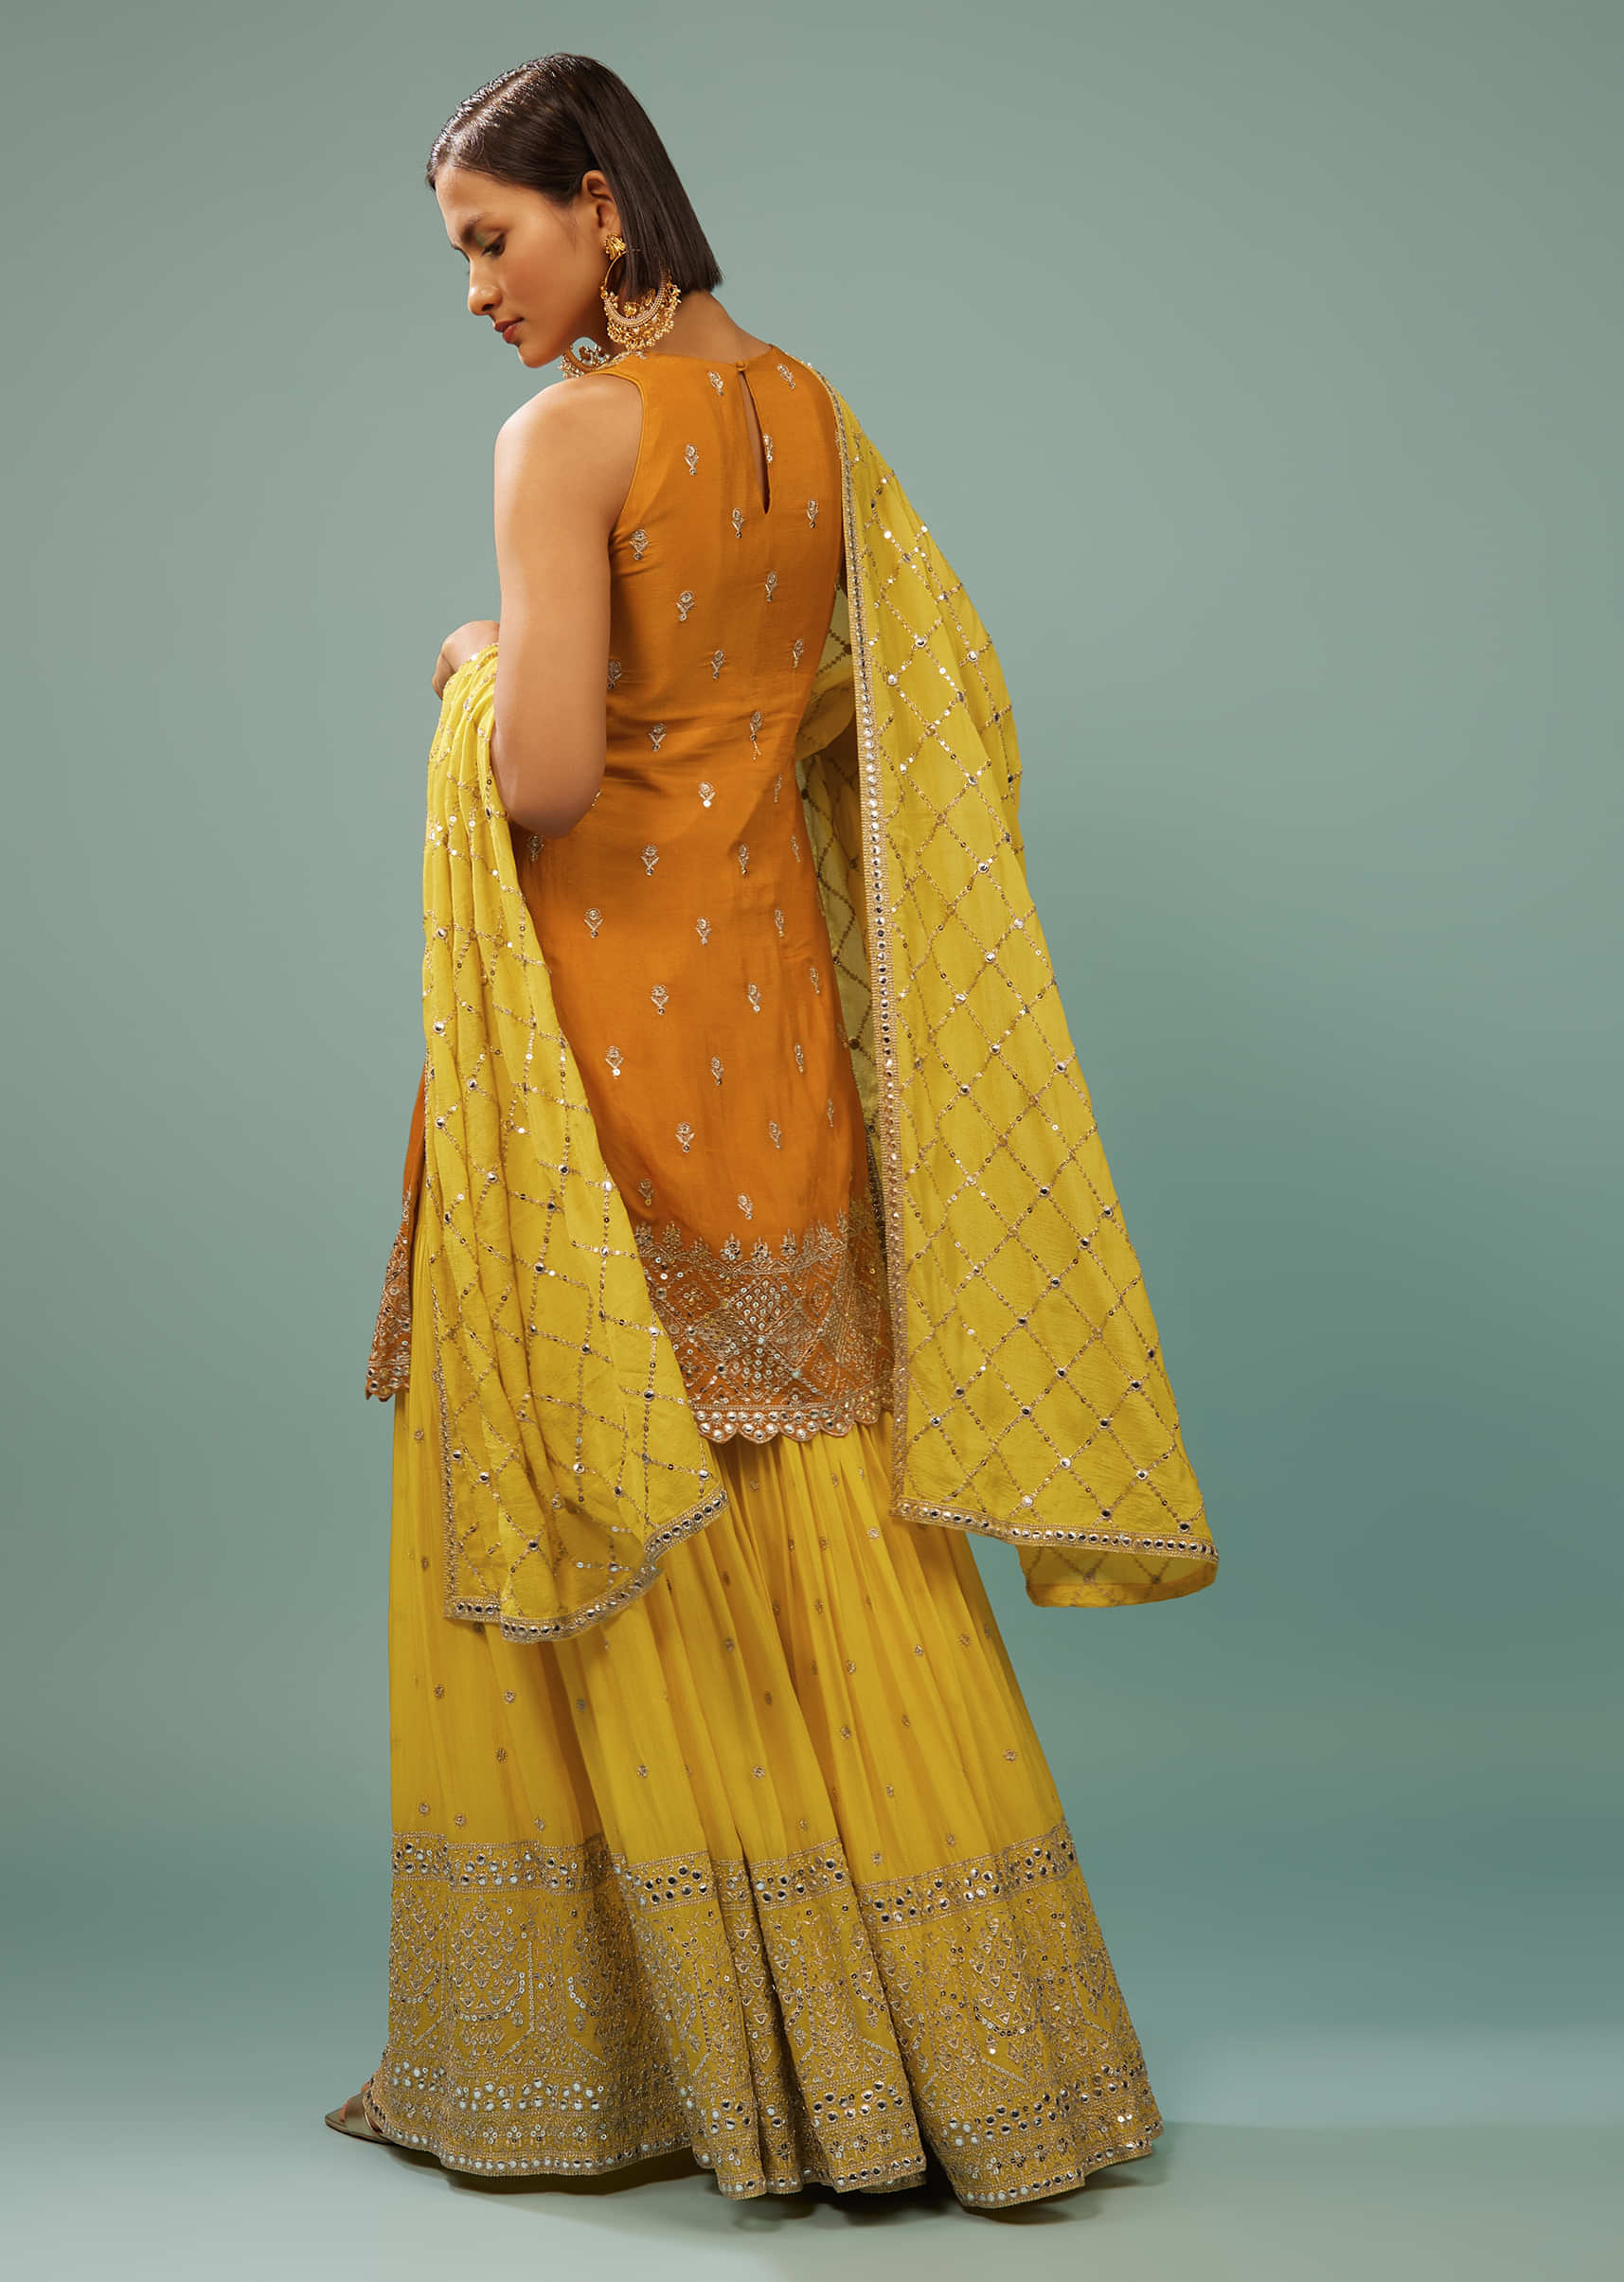 Chrome Yellow Sharara Suit With Embroidery